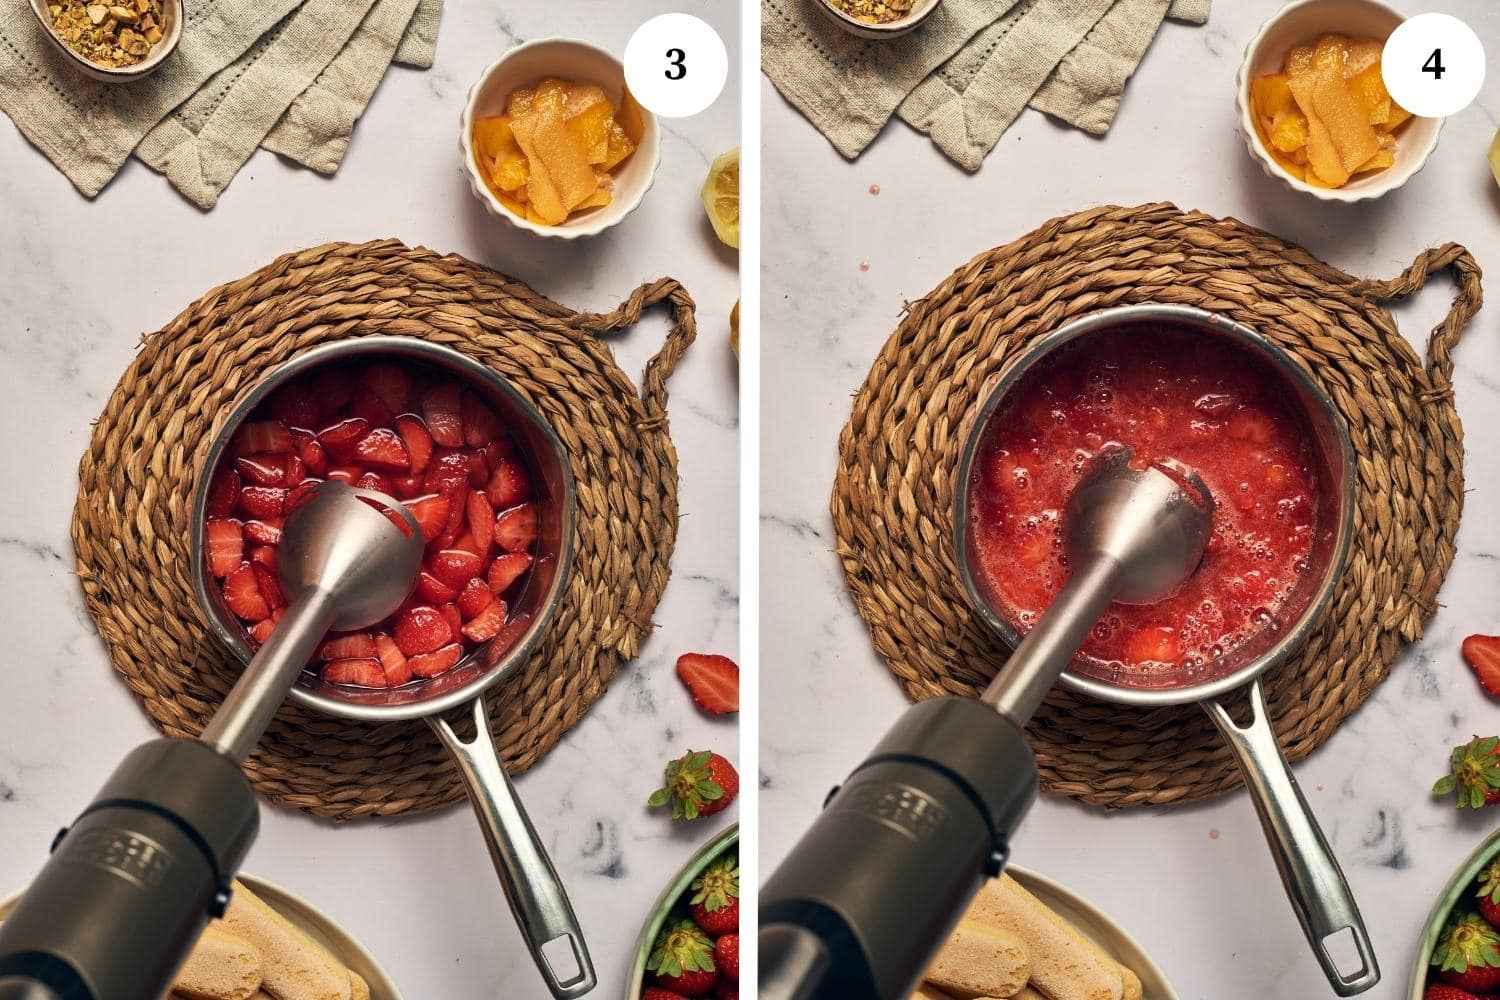 Process for making strawberry syrup for strawberry tiramisu: remove the lemon rinds and blend it with an immersion blender